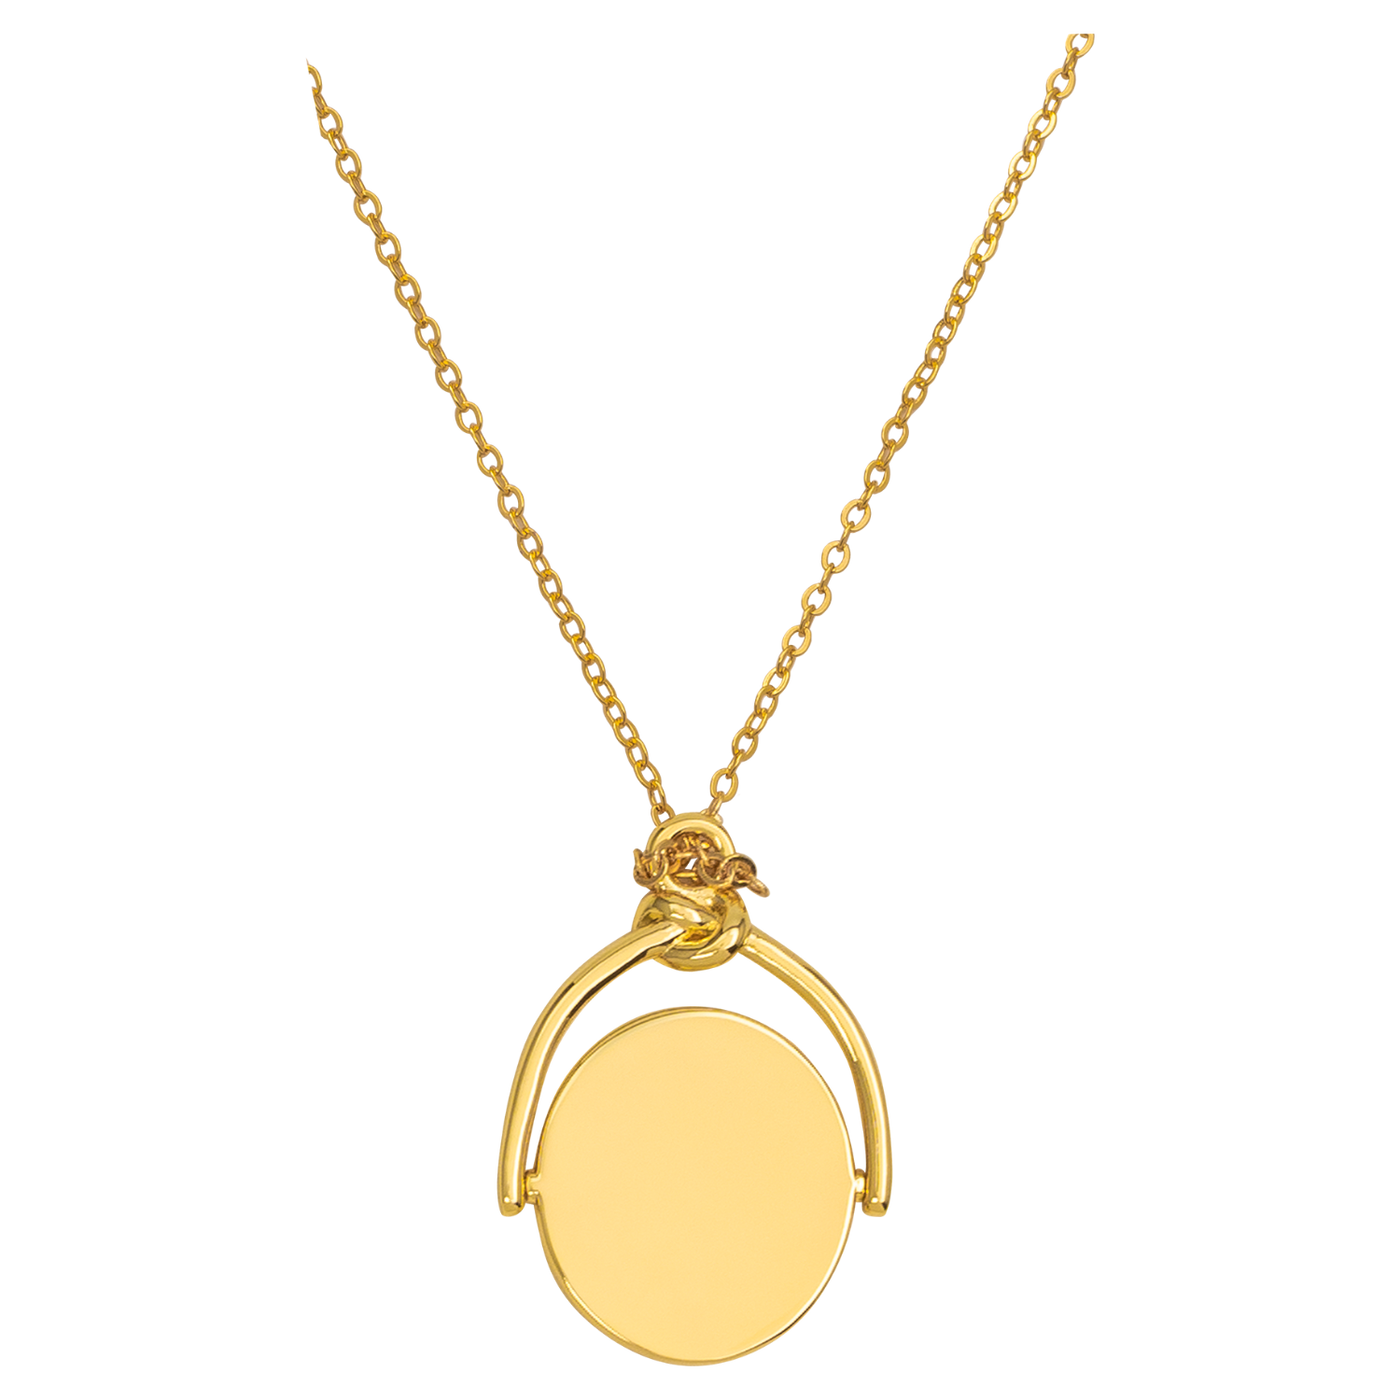 Maila necklace with engraving